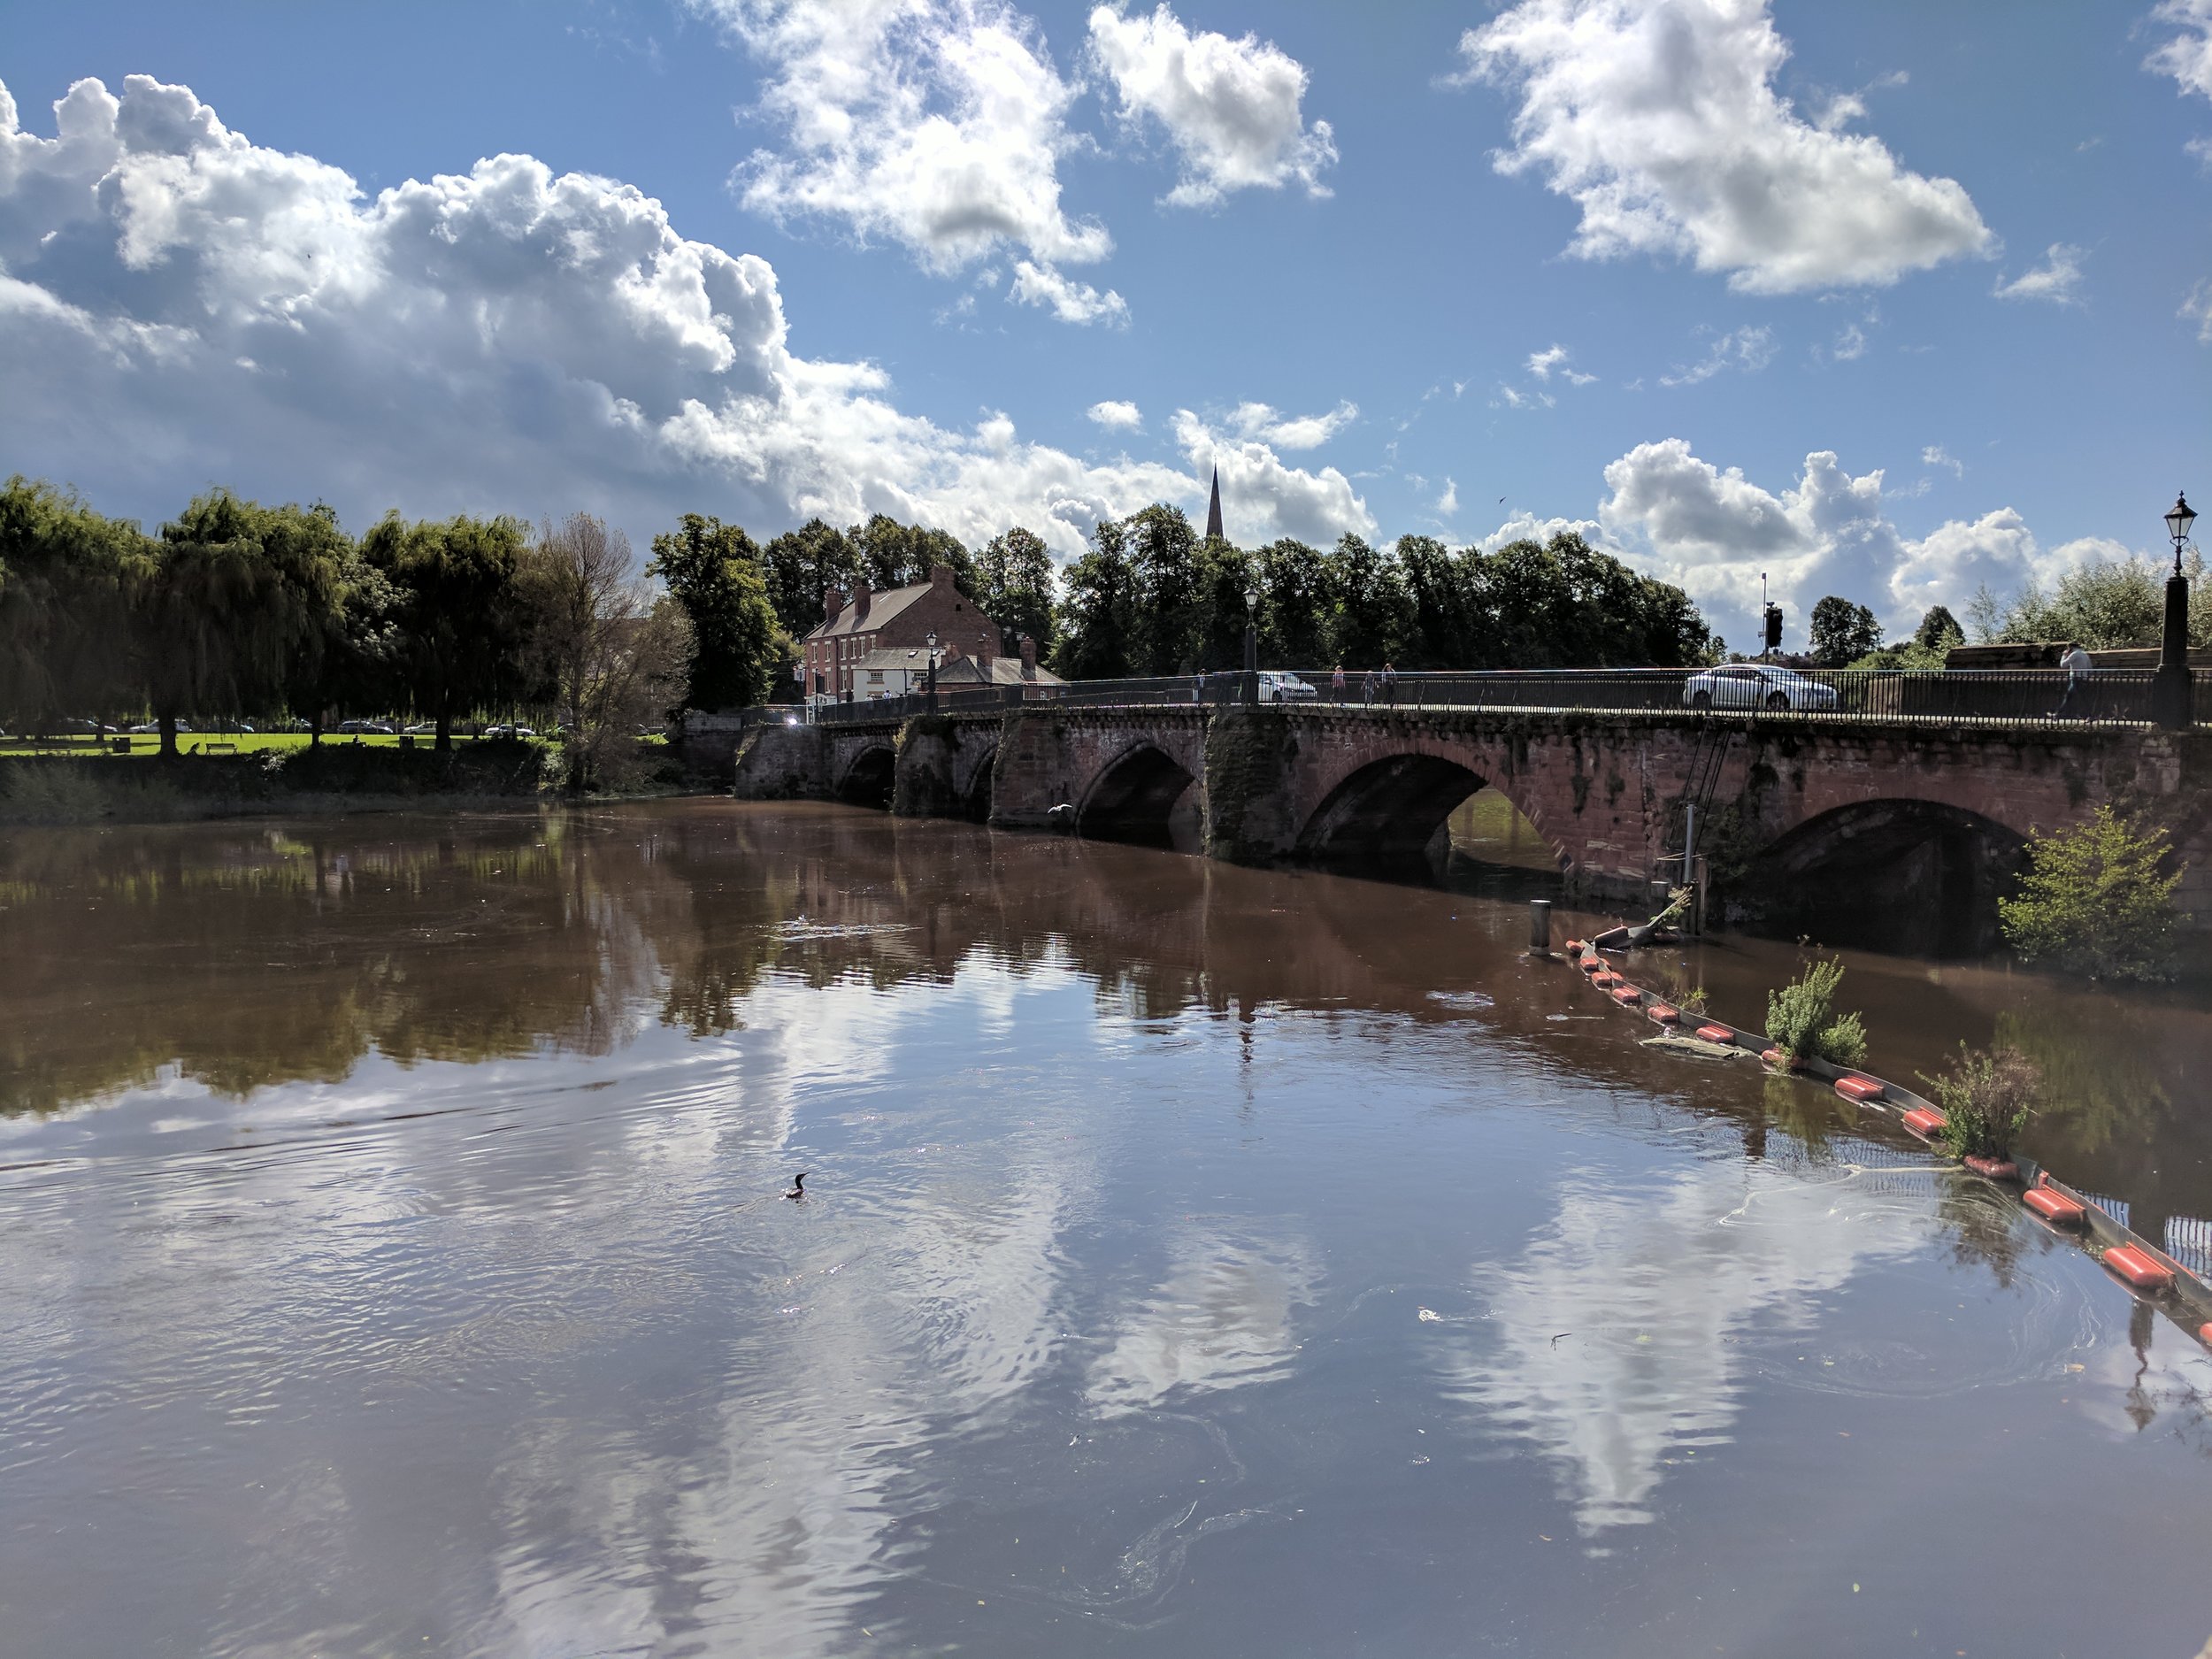  The River Dee in Chester, England 